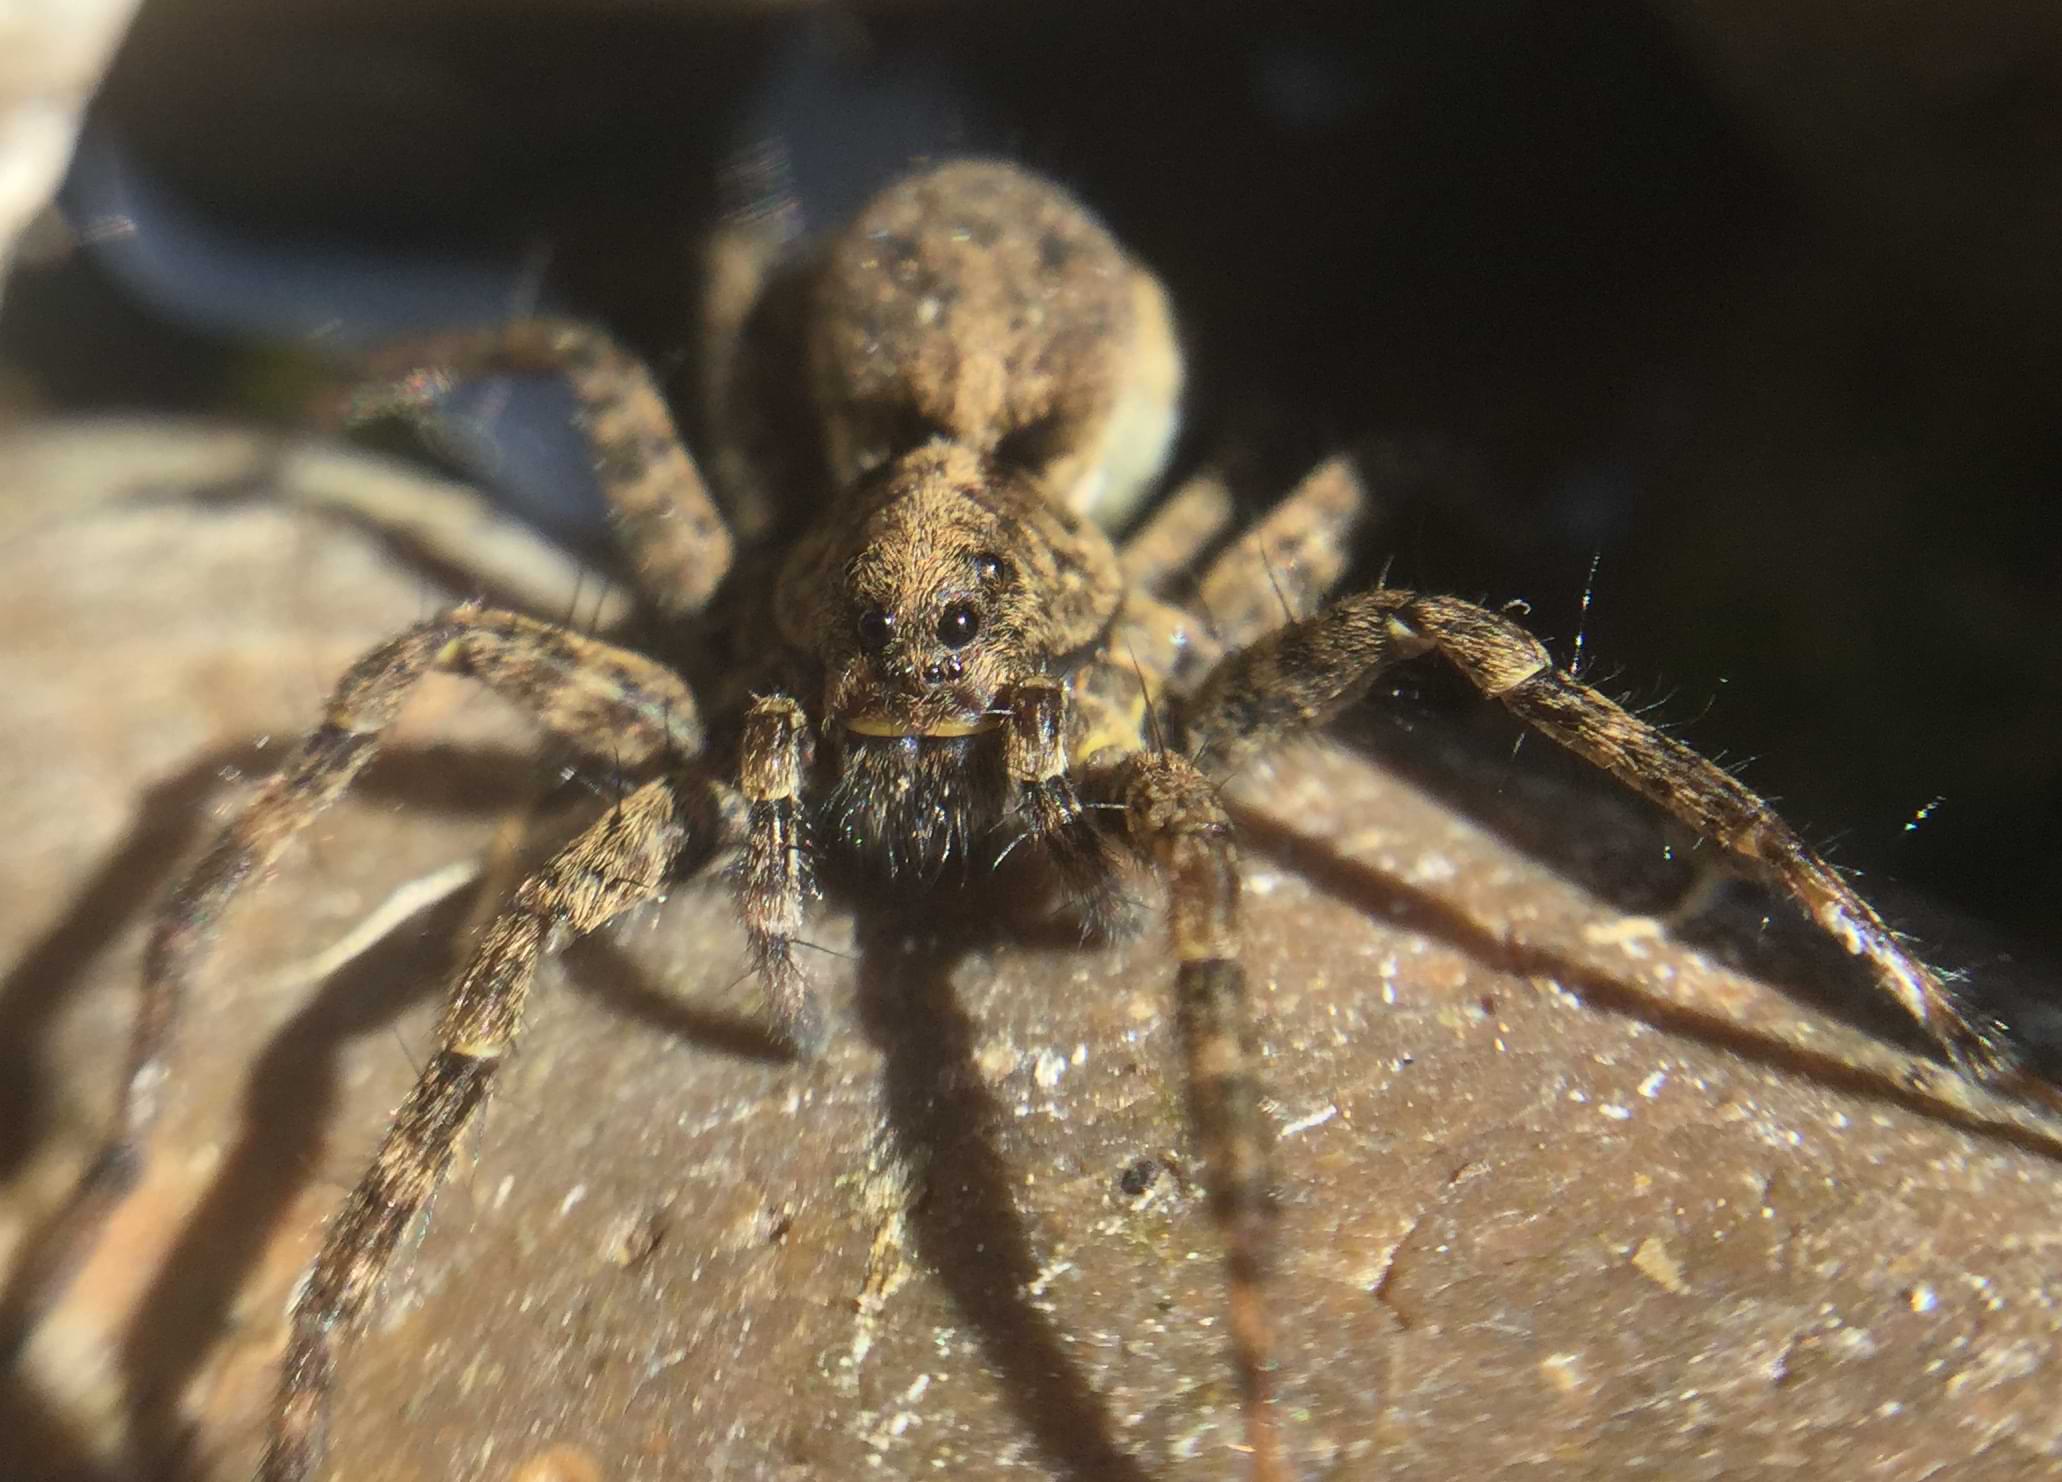 Close up photo of a large, light-brown spider. The spider is facing the camera and has two big eyes on the side of its head, another two big eyes looking forward, and four smaller eyes positioned underneath those. The spider's legs and palps have lots of long thick spines on them.